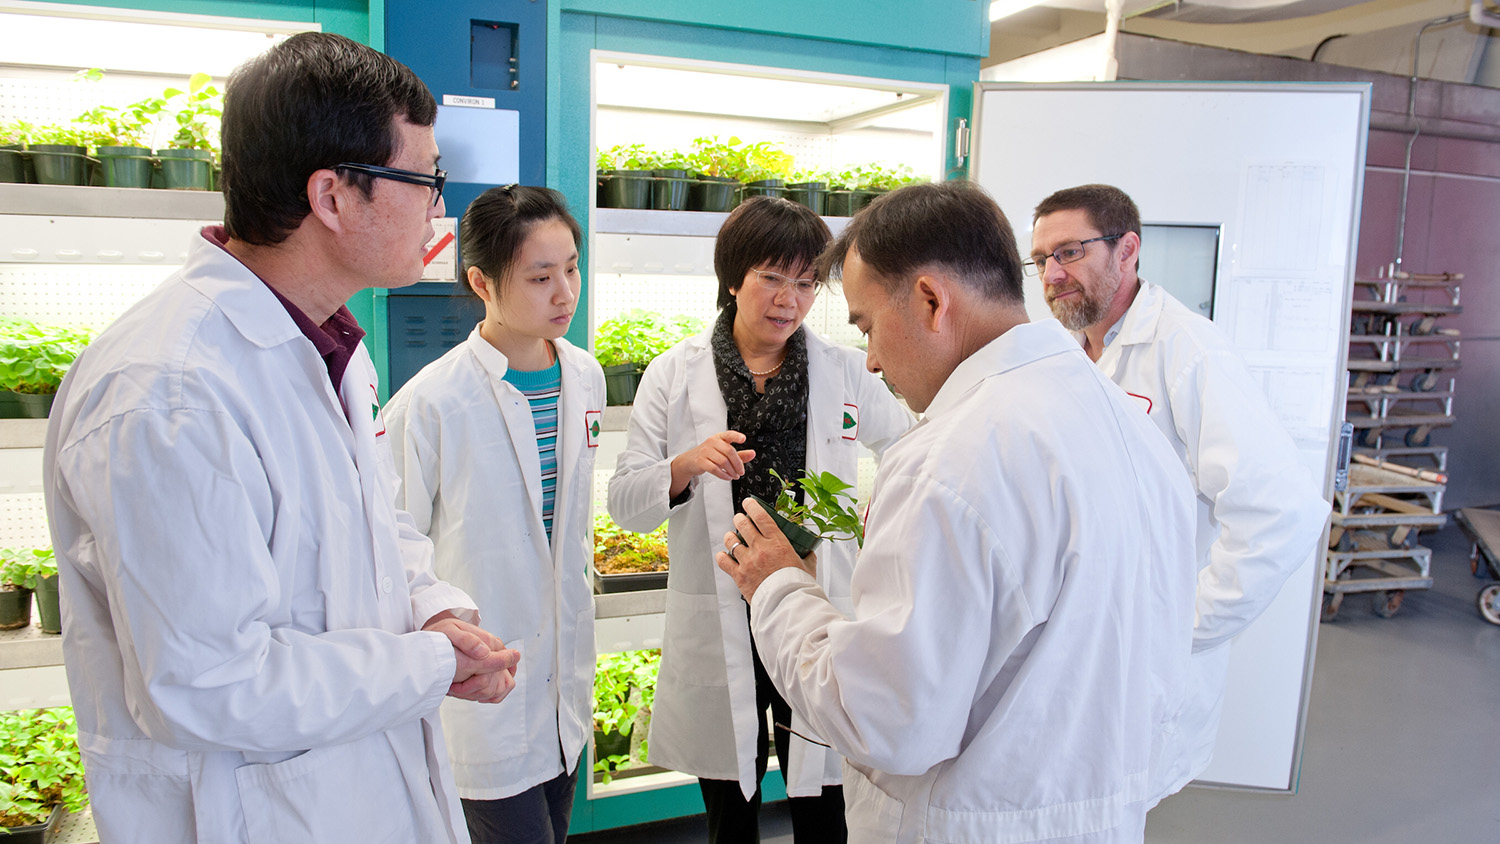 Five researchers looking at plants.